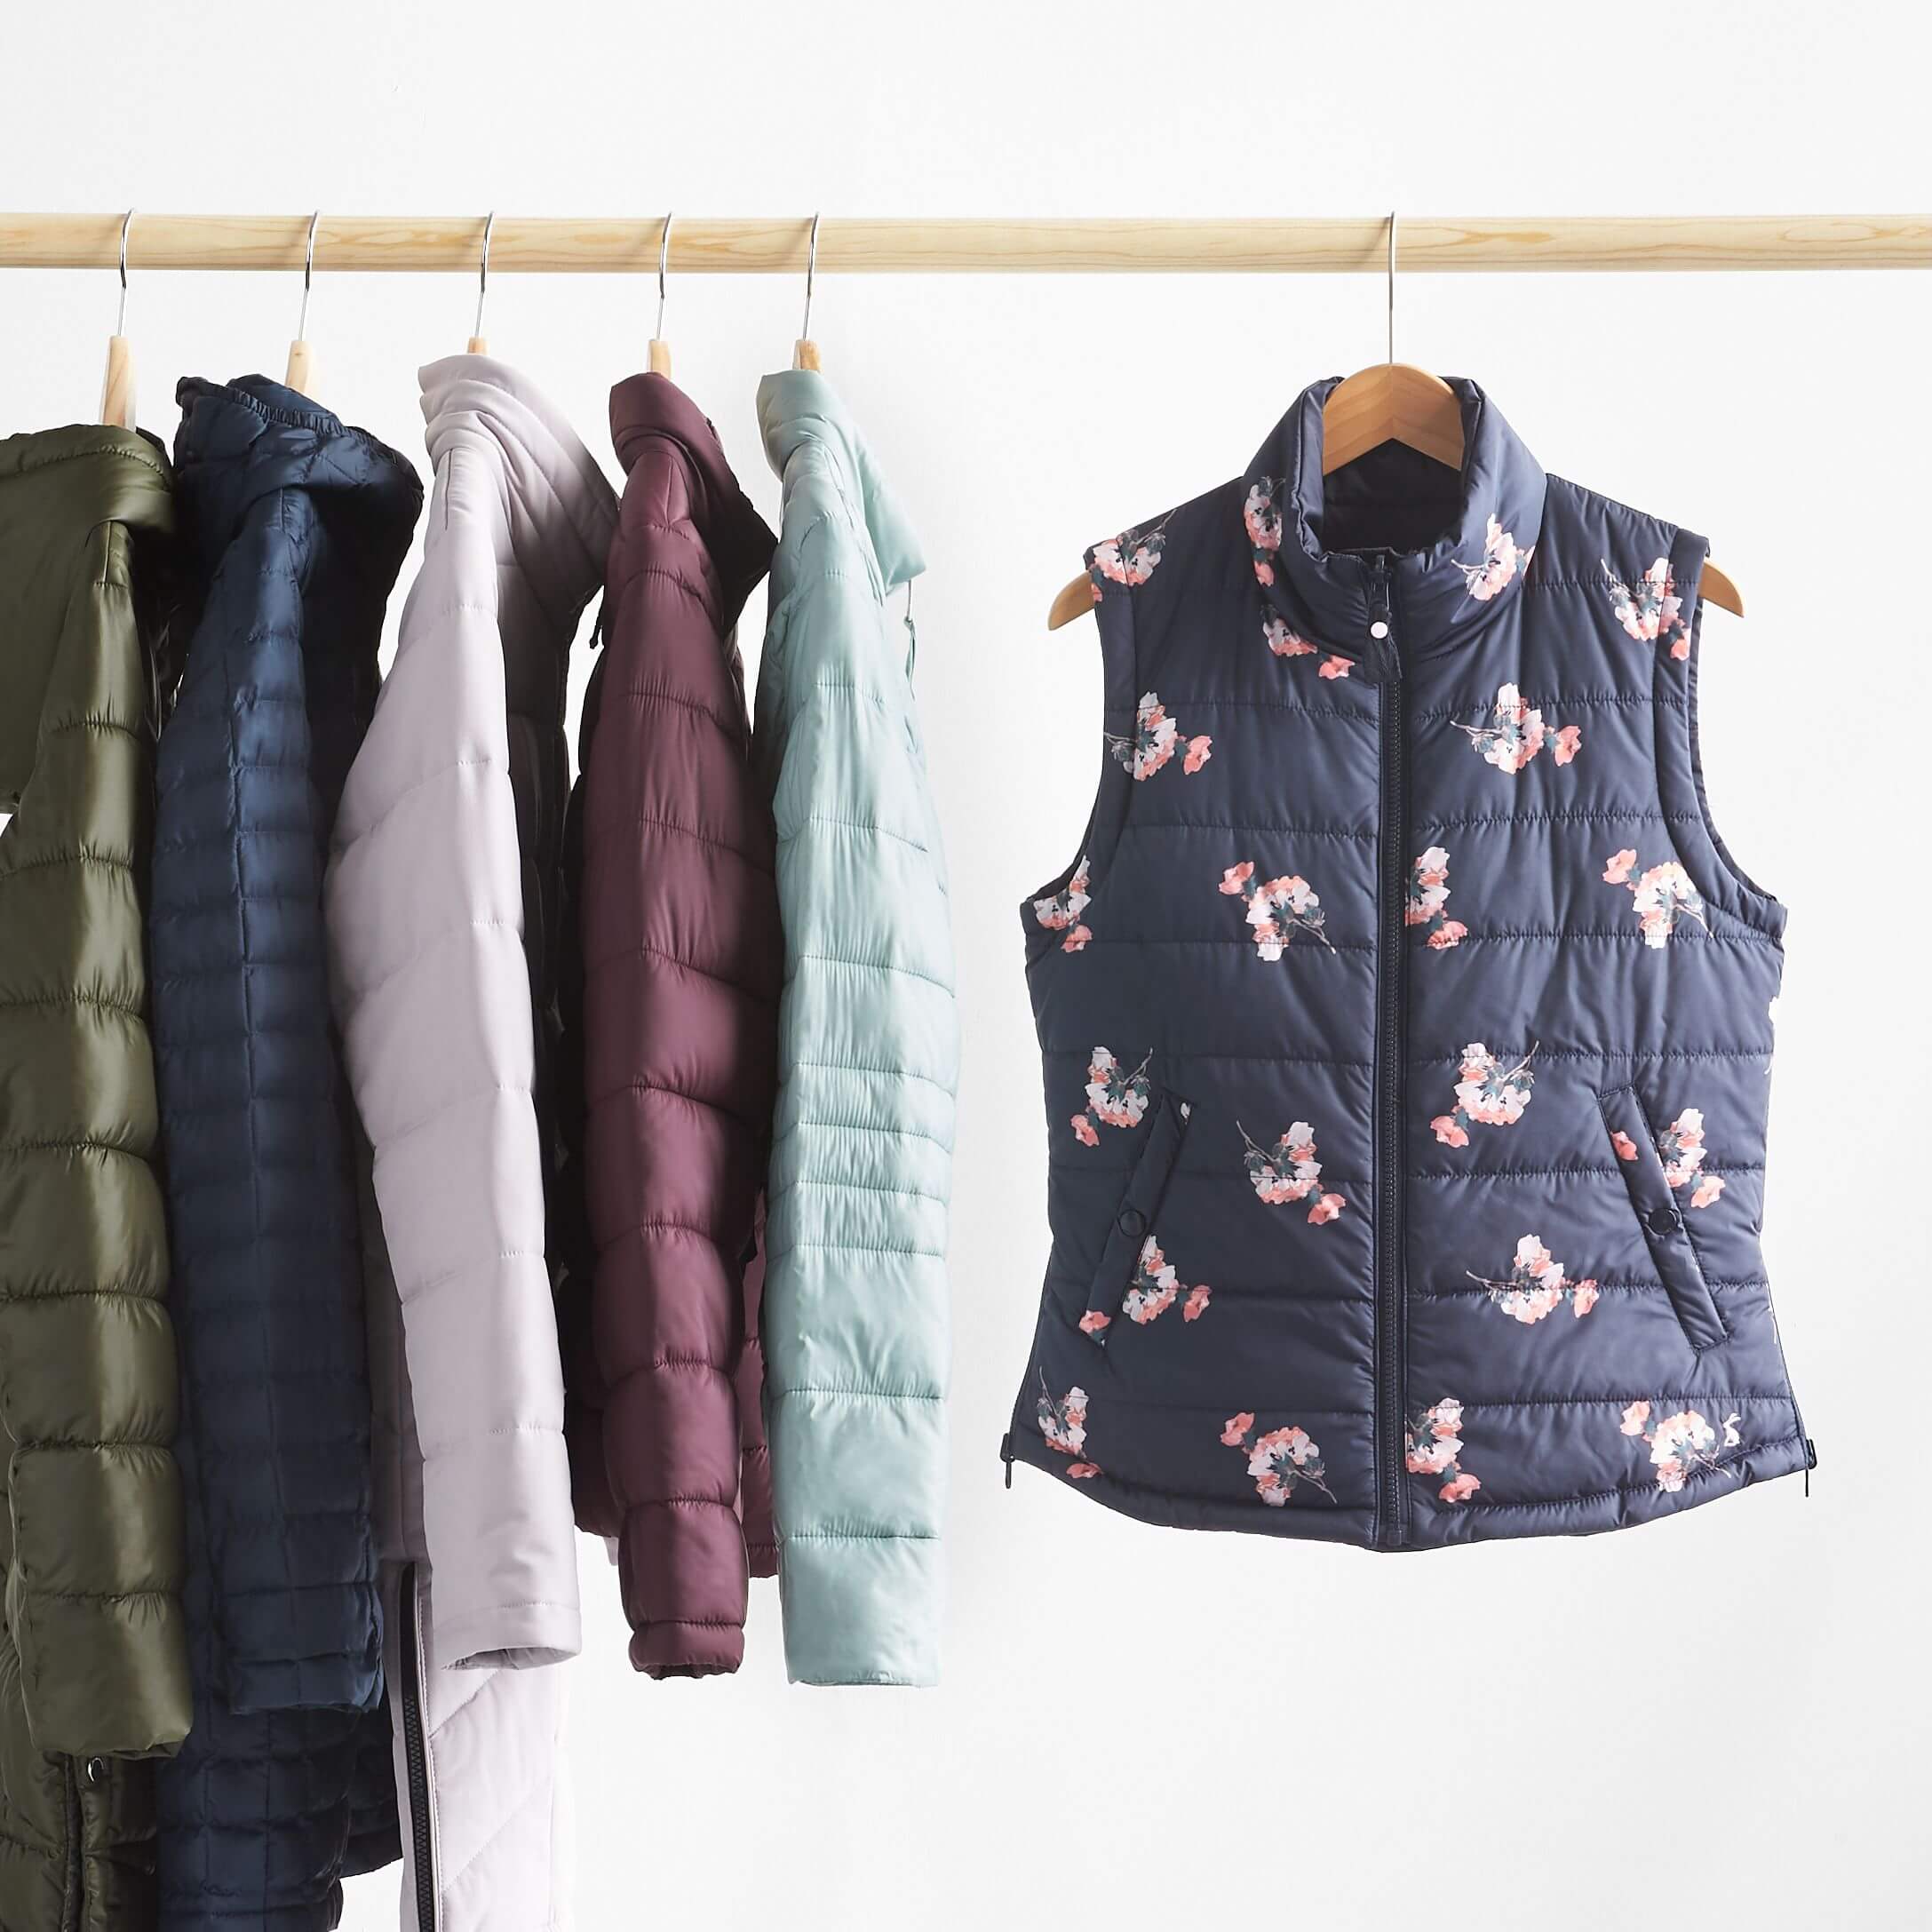 Stitch Fix Women's rack image featuring navy vest with floral print and puffer jackets in light blue, burgundy, lilac, navy and olive green tones hanging on wooden pole. 